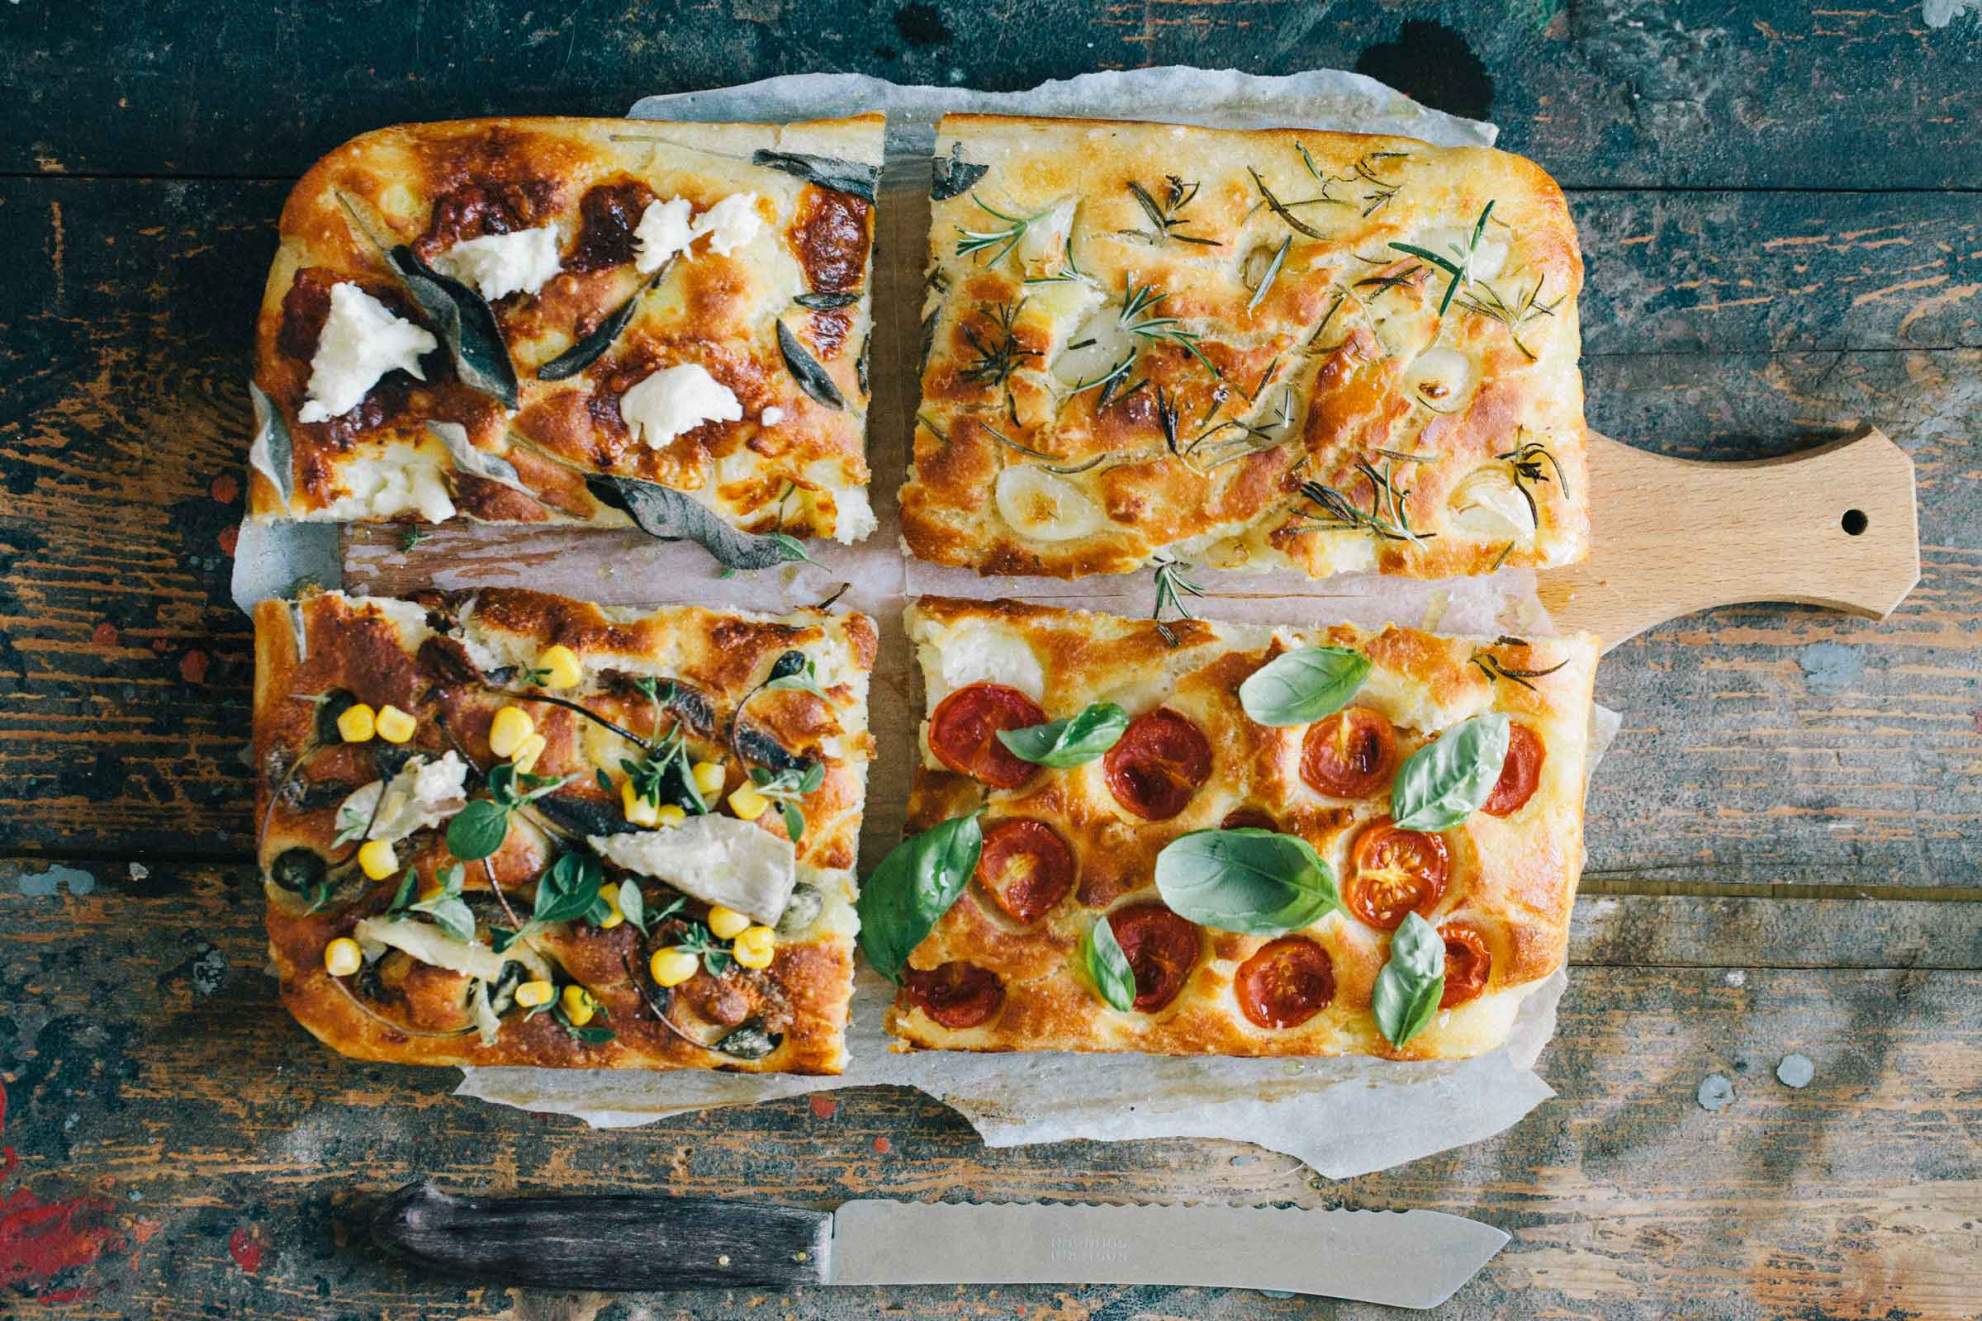 https://jernejkitchen.com/sites/default/files/styles/recipe_headerbreakpoints_theme_jernejkitchenr_screen-md-max_2x/public/potato-focaccia-with-four-yummy-toppings-1-jernejkitchen.jpg?itok=6yGbZ3m2